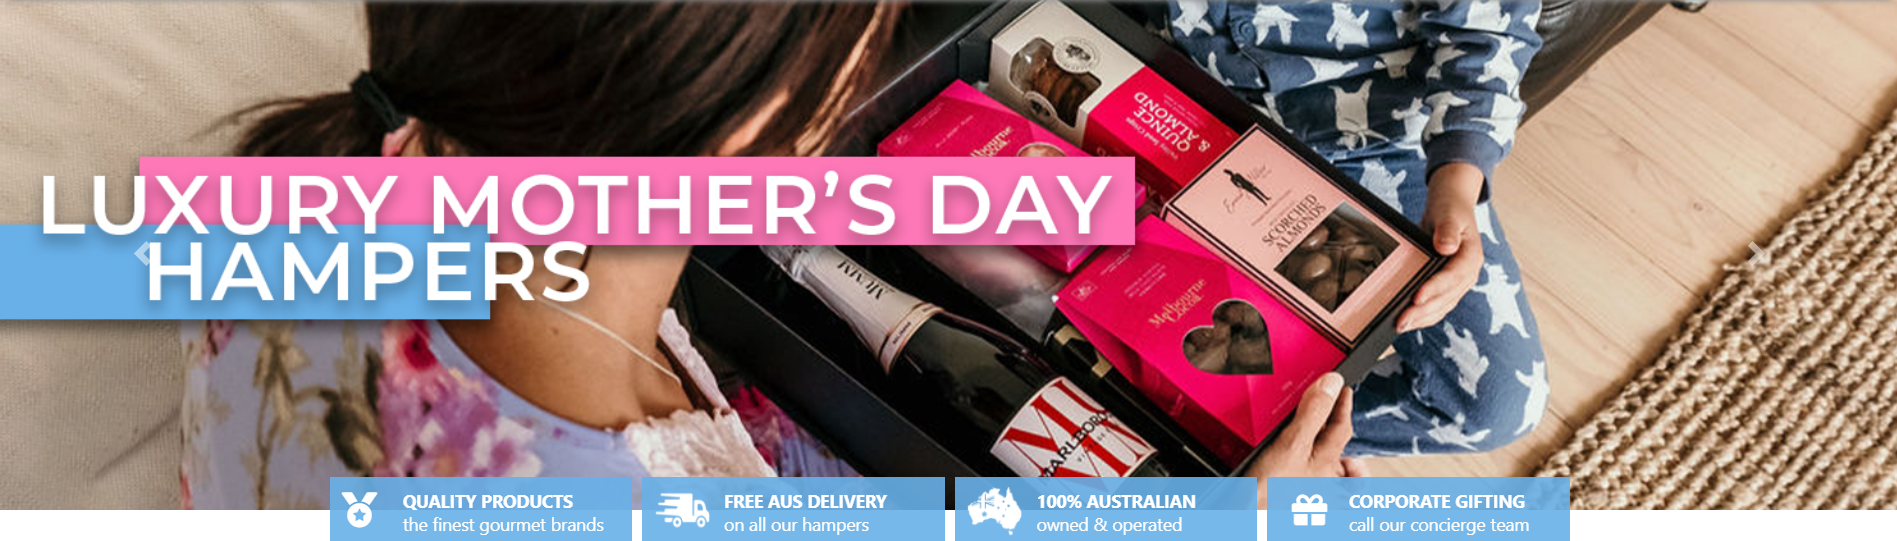 Get Mother's Day hampers from just $39